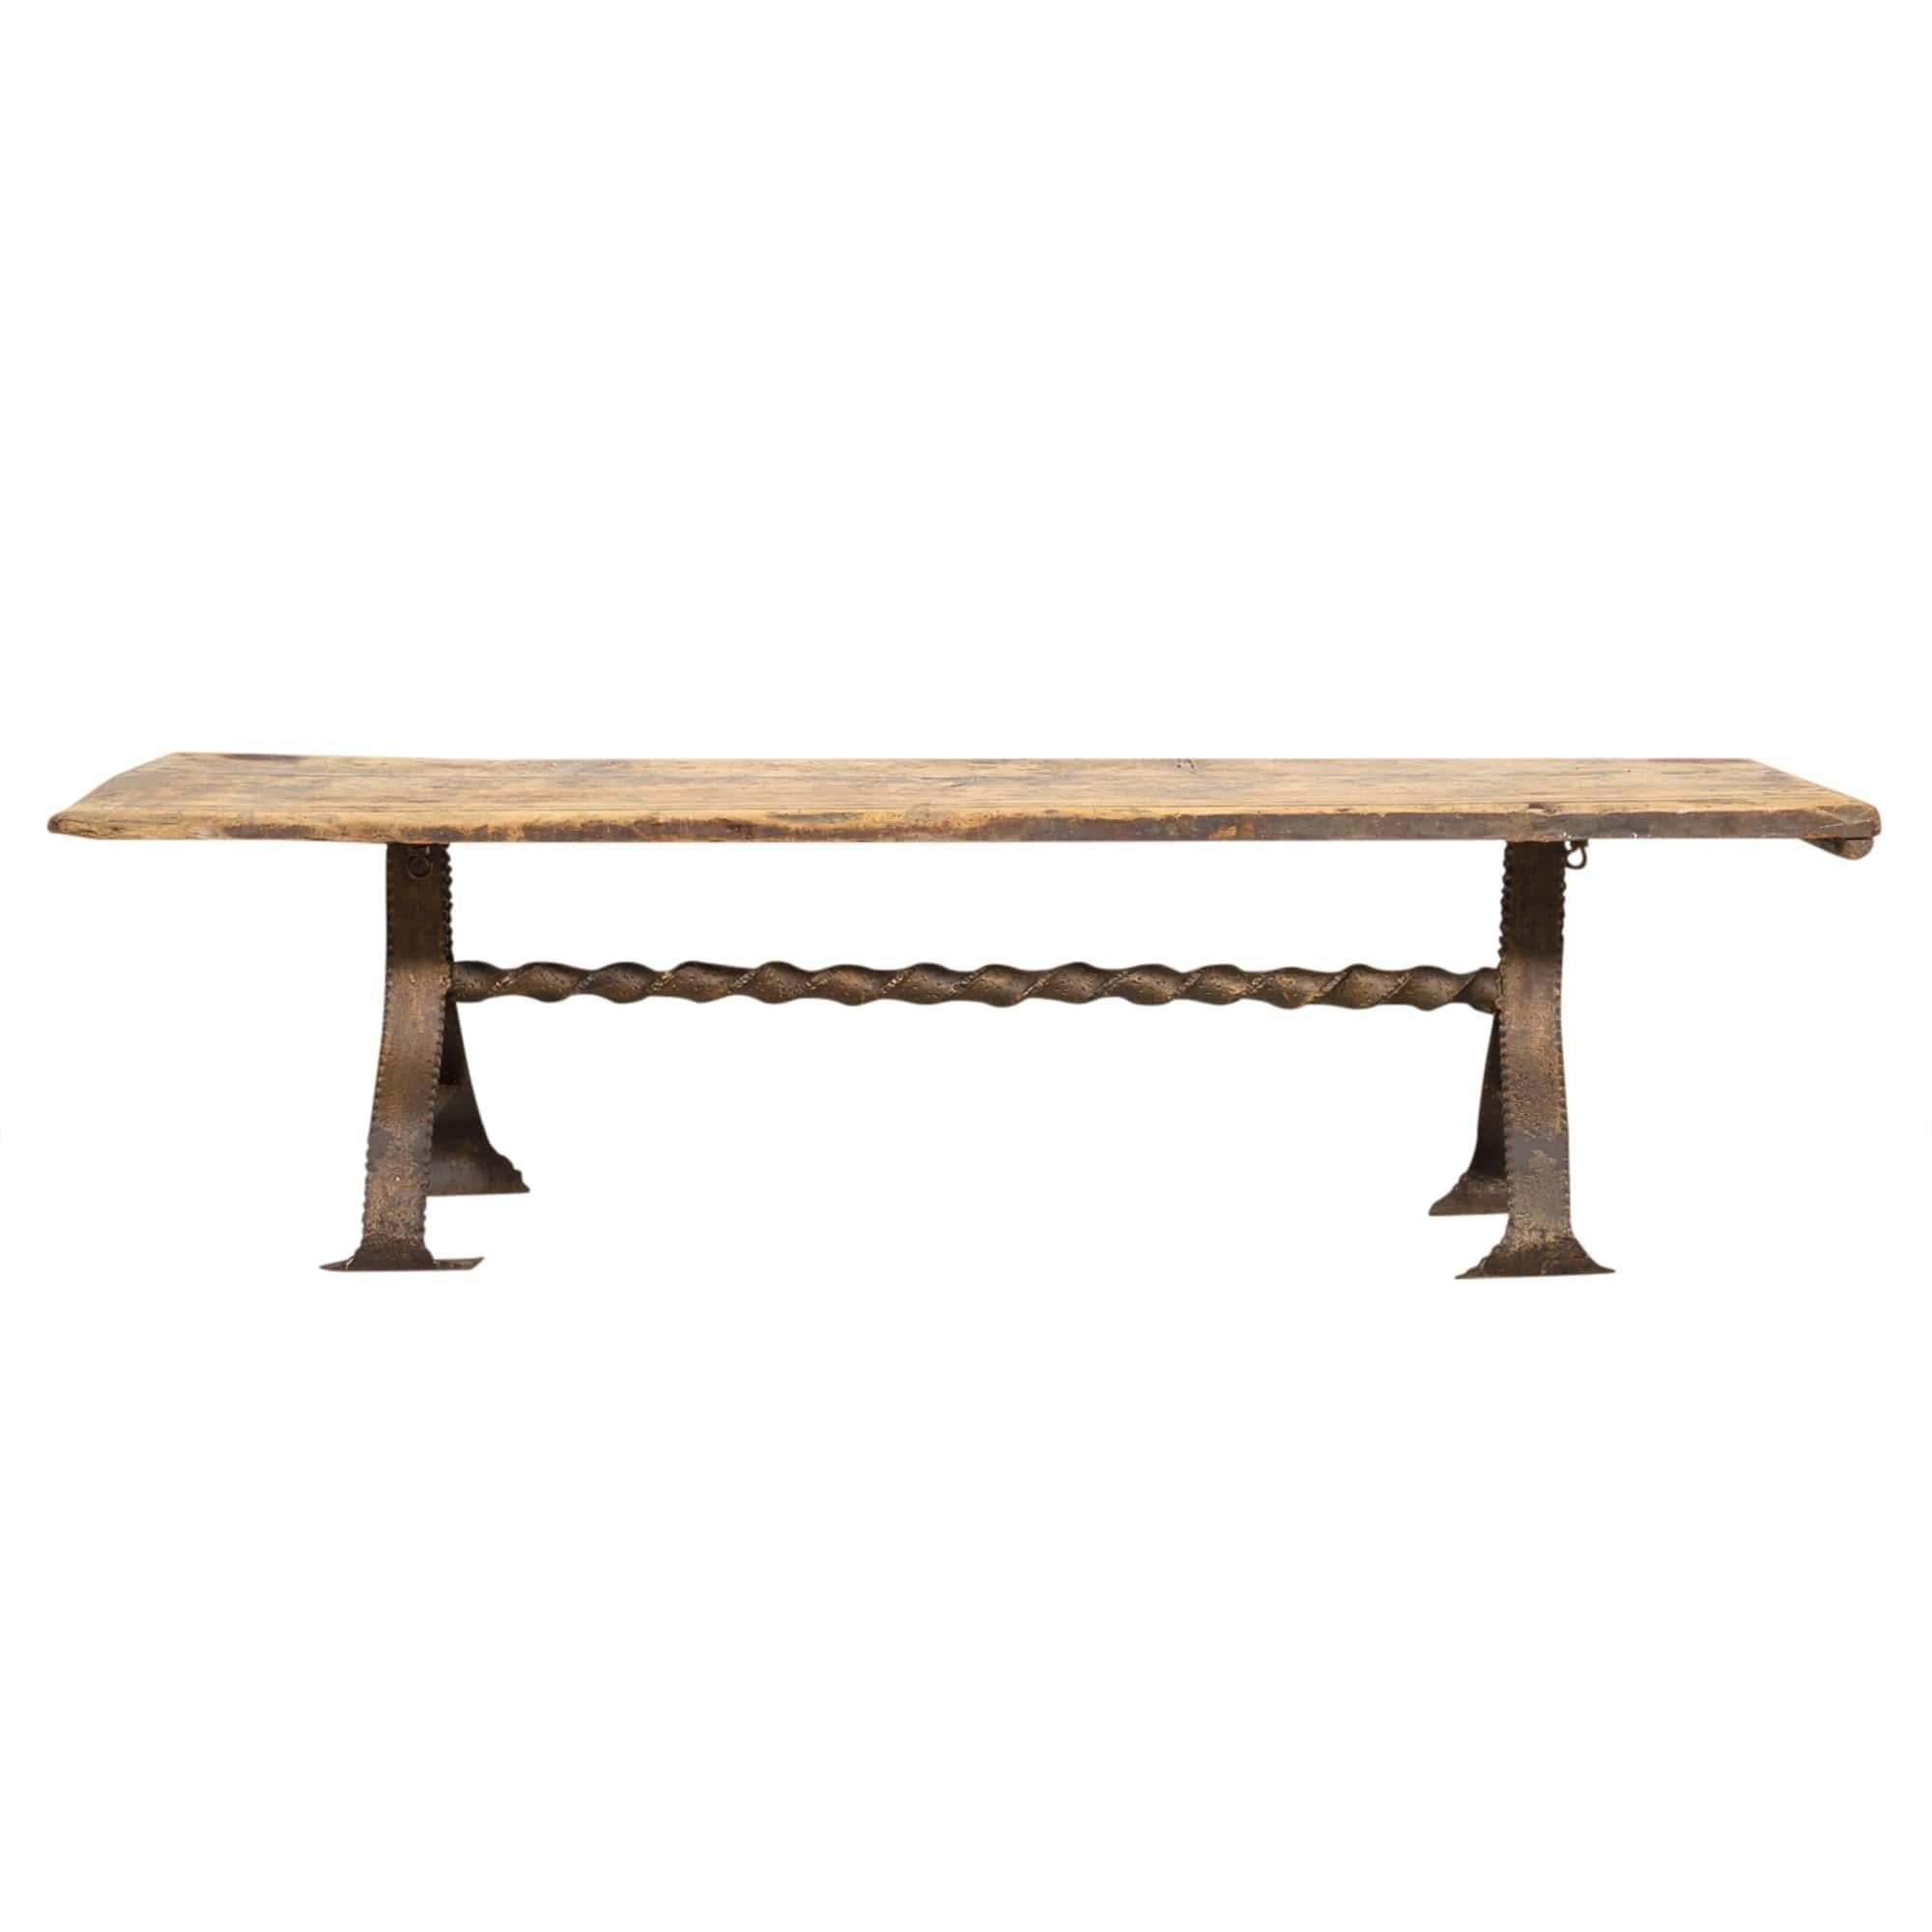 Handsome 18th century French bench handcrafted of pine and iron in the walled Breton town of Dinan in northwest France, circa 1770s. This versatile primitive bench has a wonderful sun bleached patina and features a two plank top resting on an iron